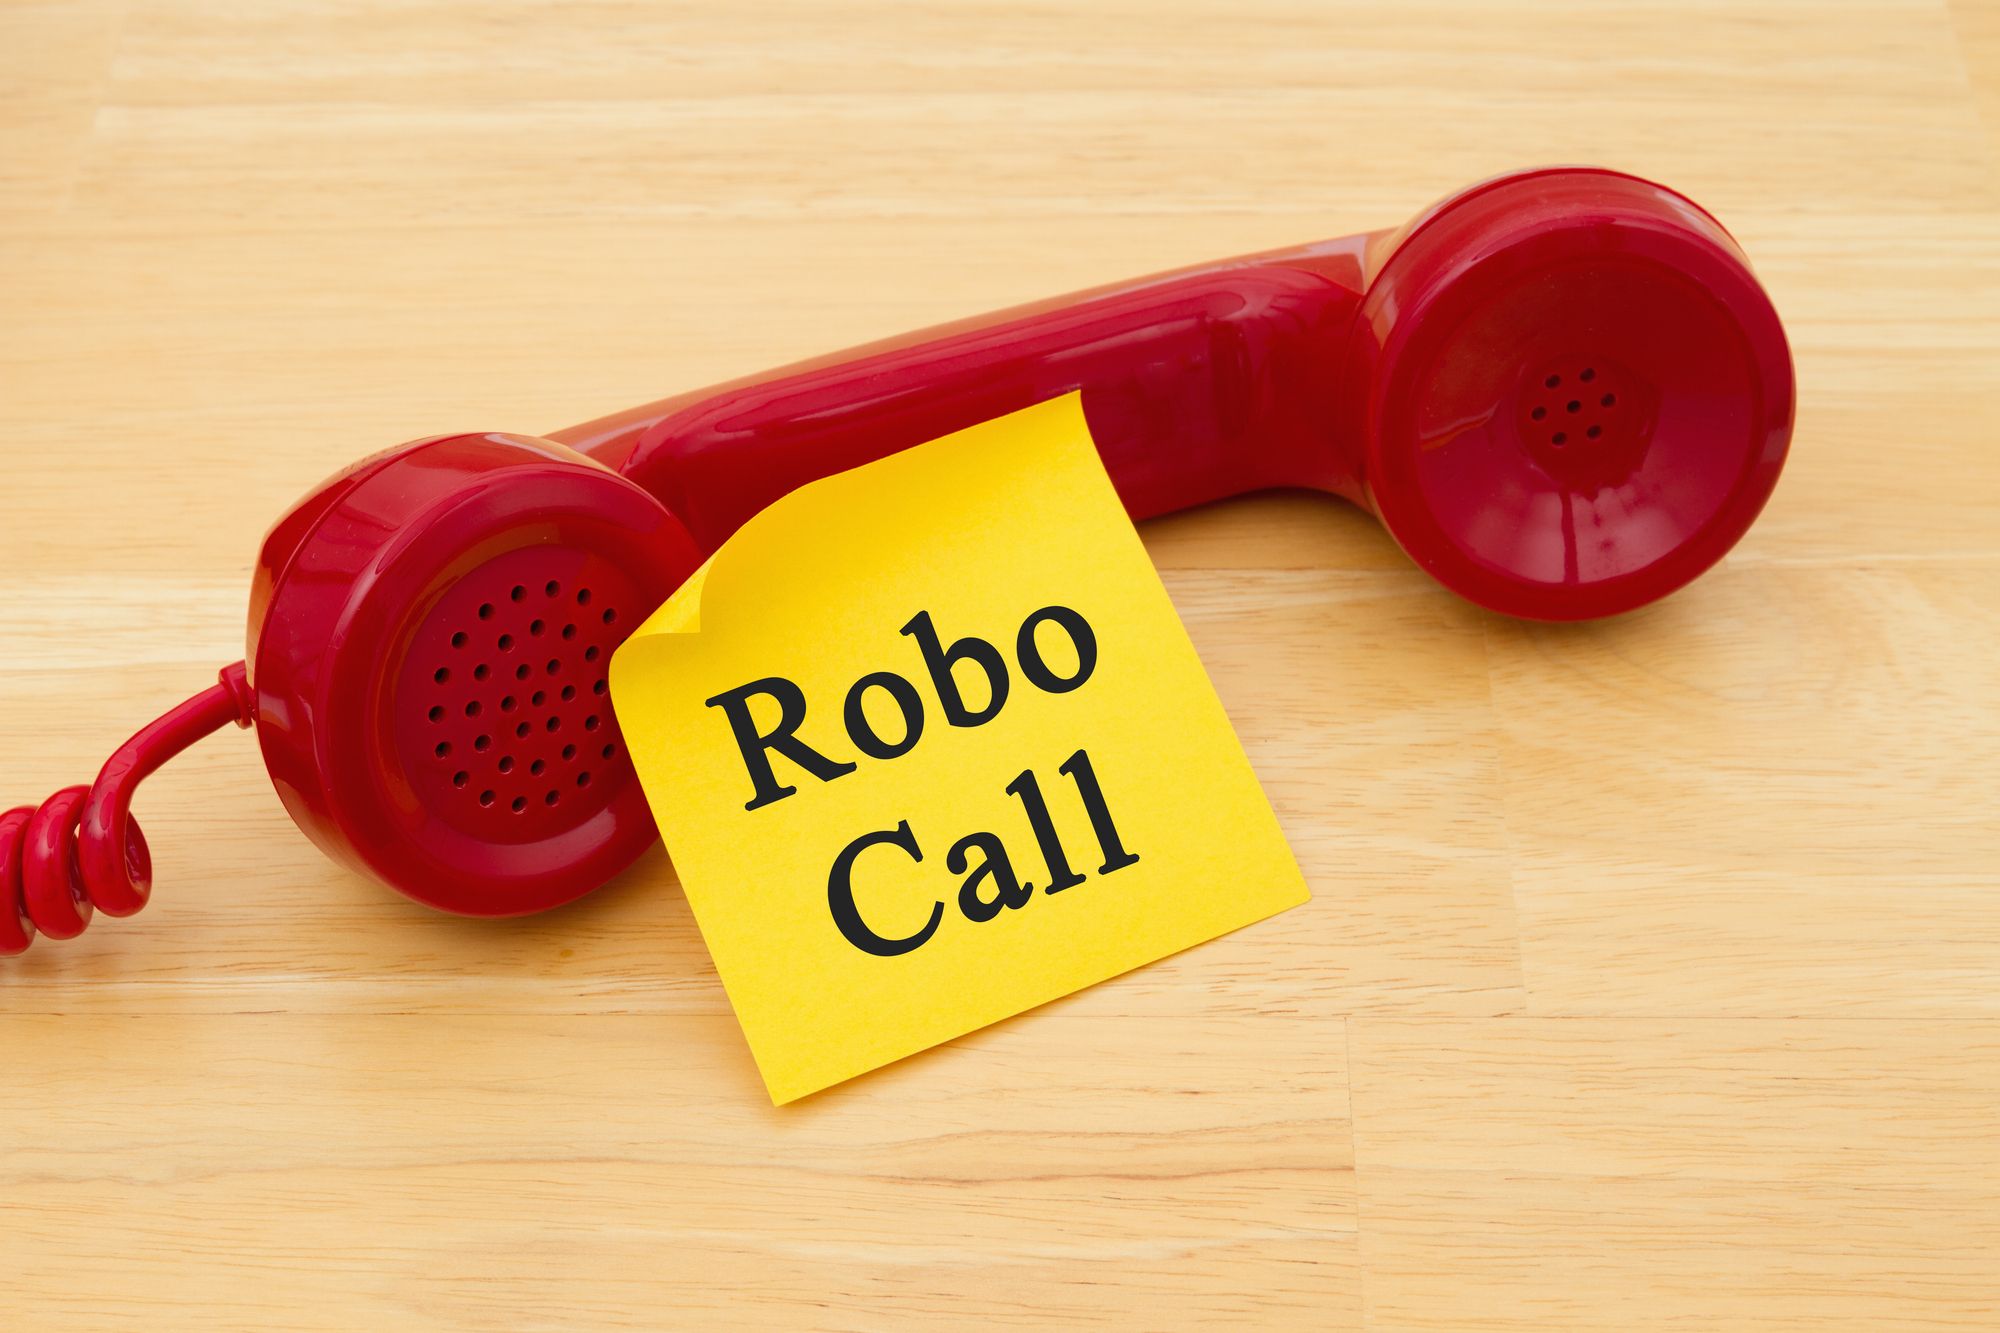 Insurance spam calls are often placed with robocallers.